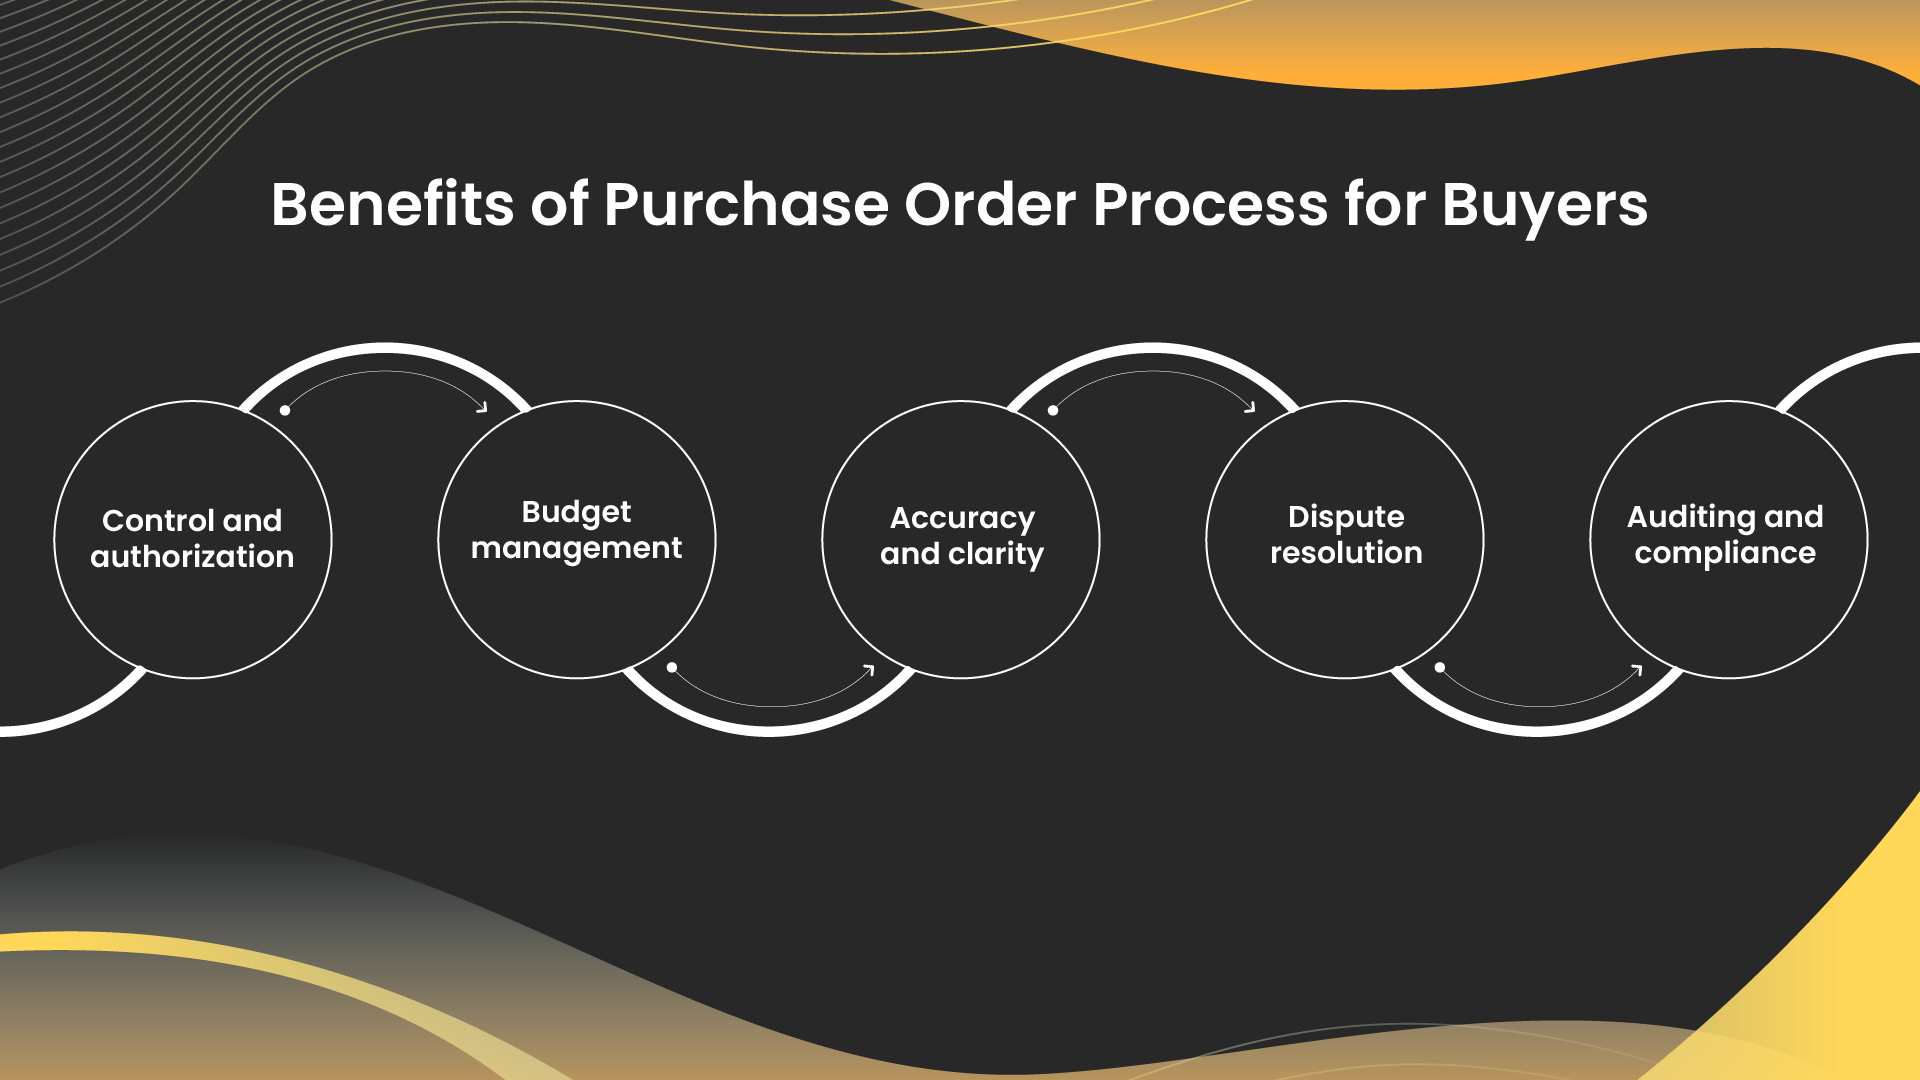 Benefits of Purchase Order Process for Buyers